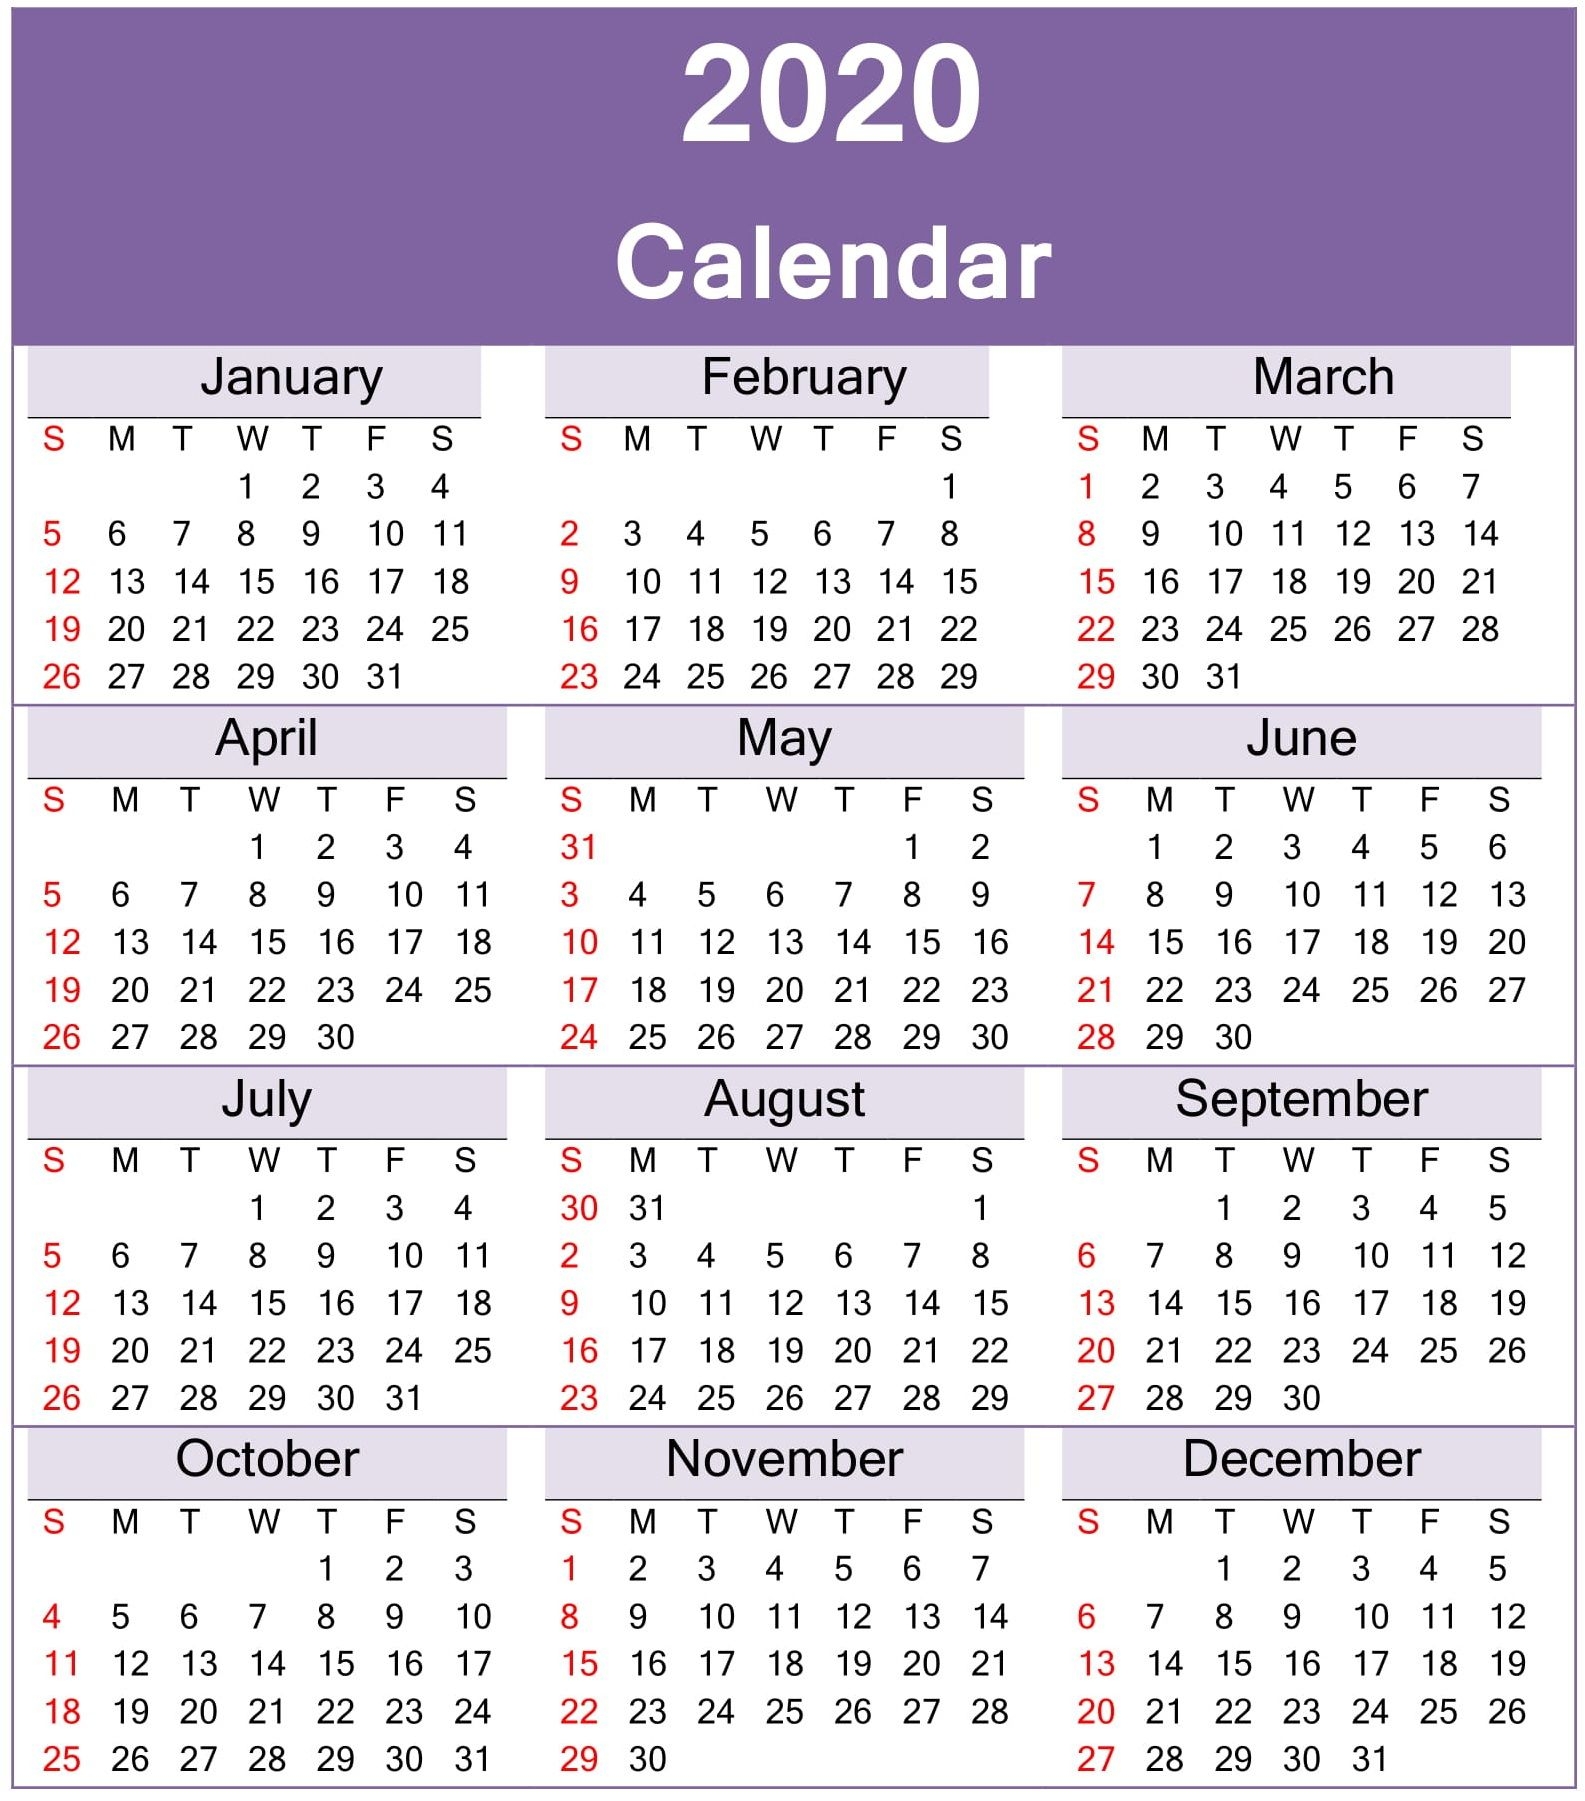 Calendar 2020 Yearly Printable Images 363